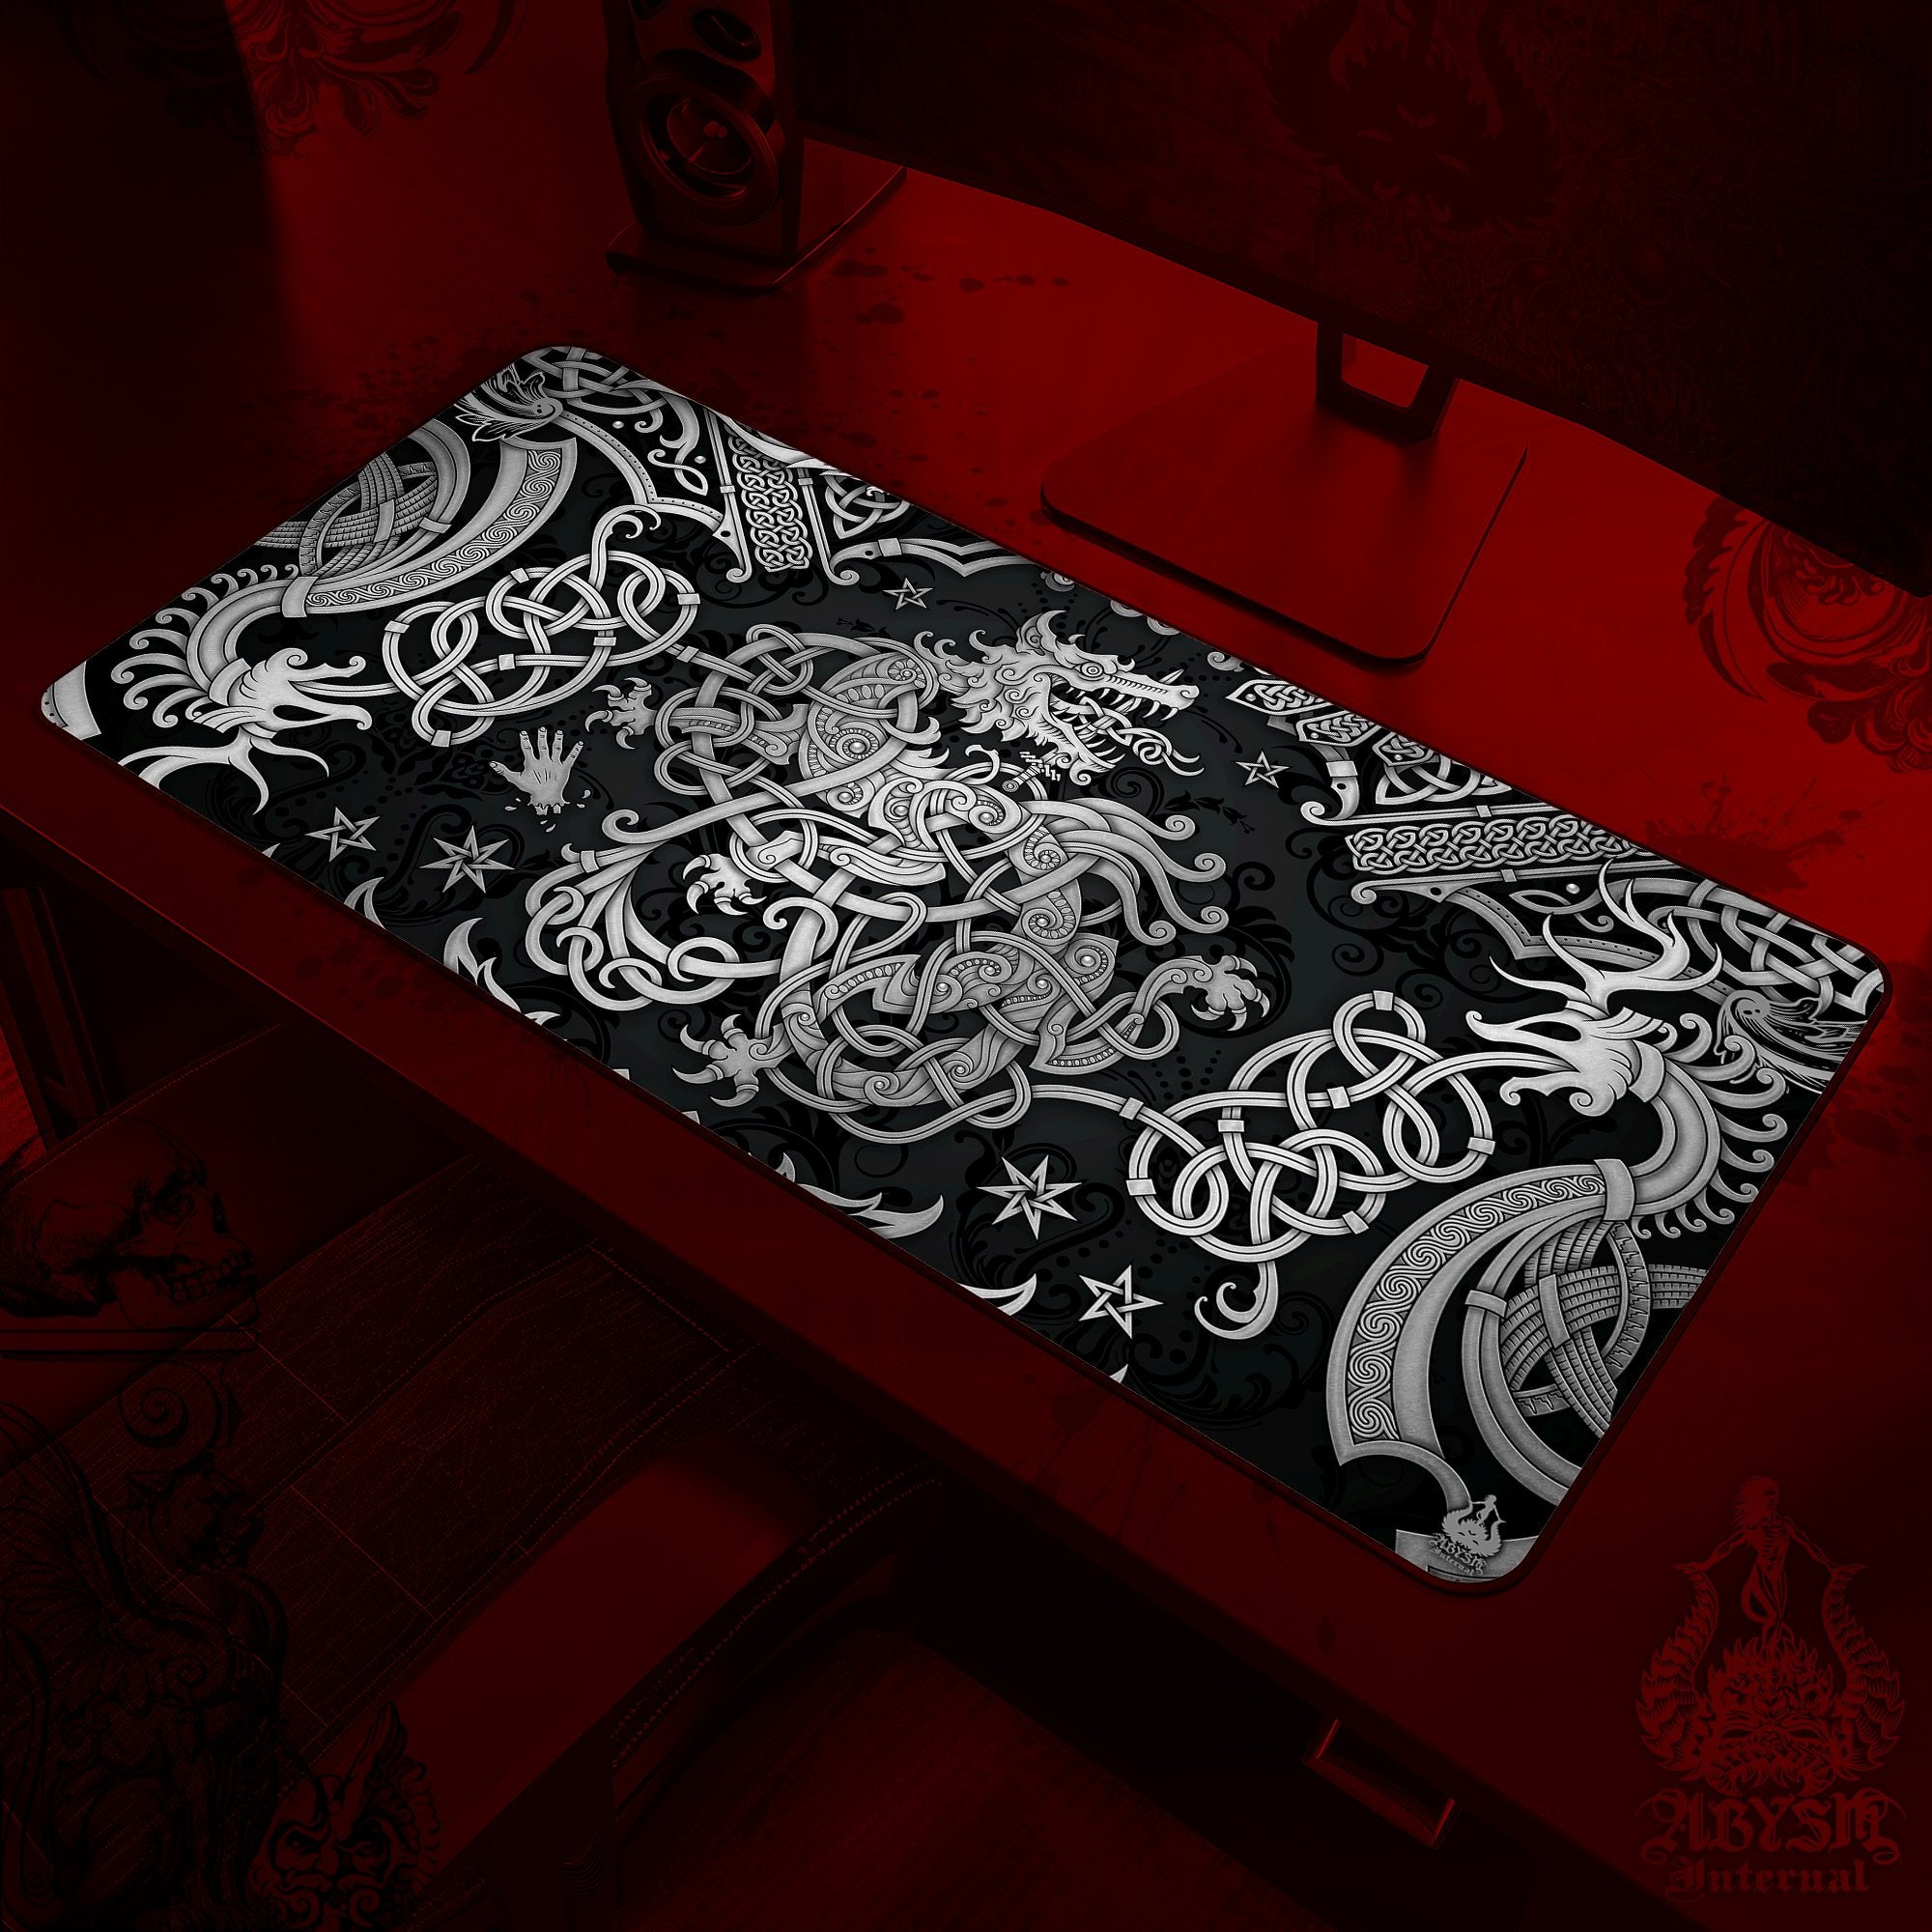 Fenrir Desk Mat, Nordic Wolf Gaming Mouse Pad, Viking Table Protector Cover, Norse Knotwork Workpad, Art Print - Abysm Internal